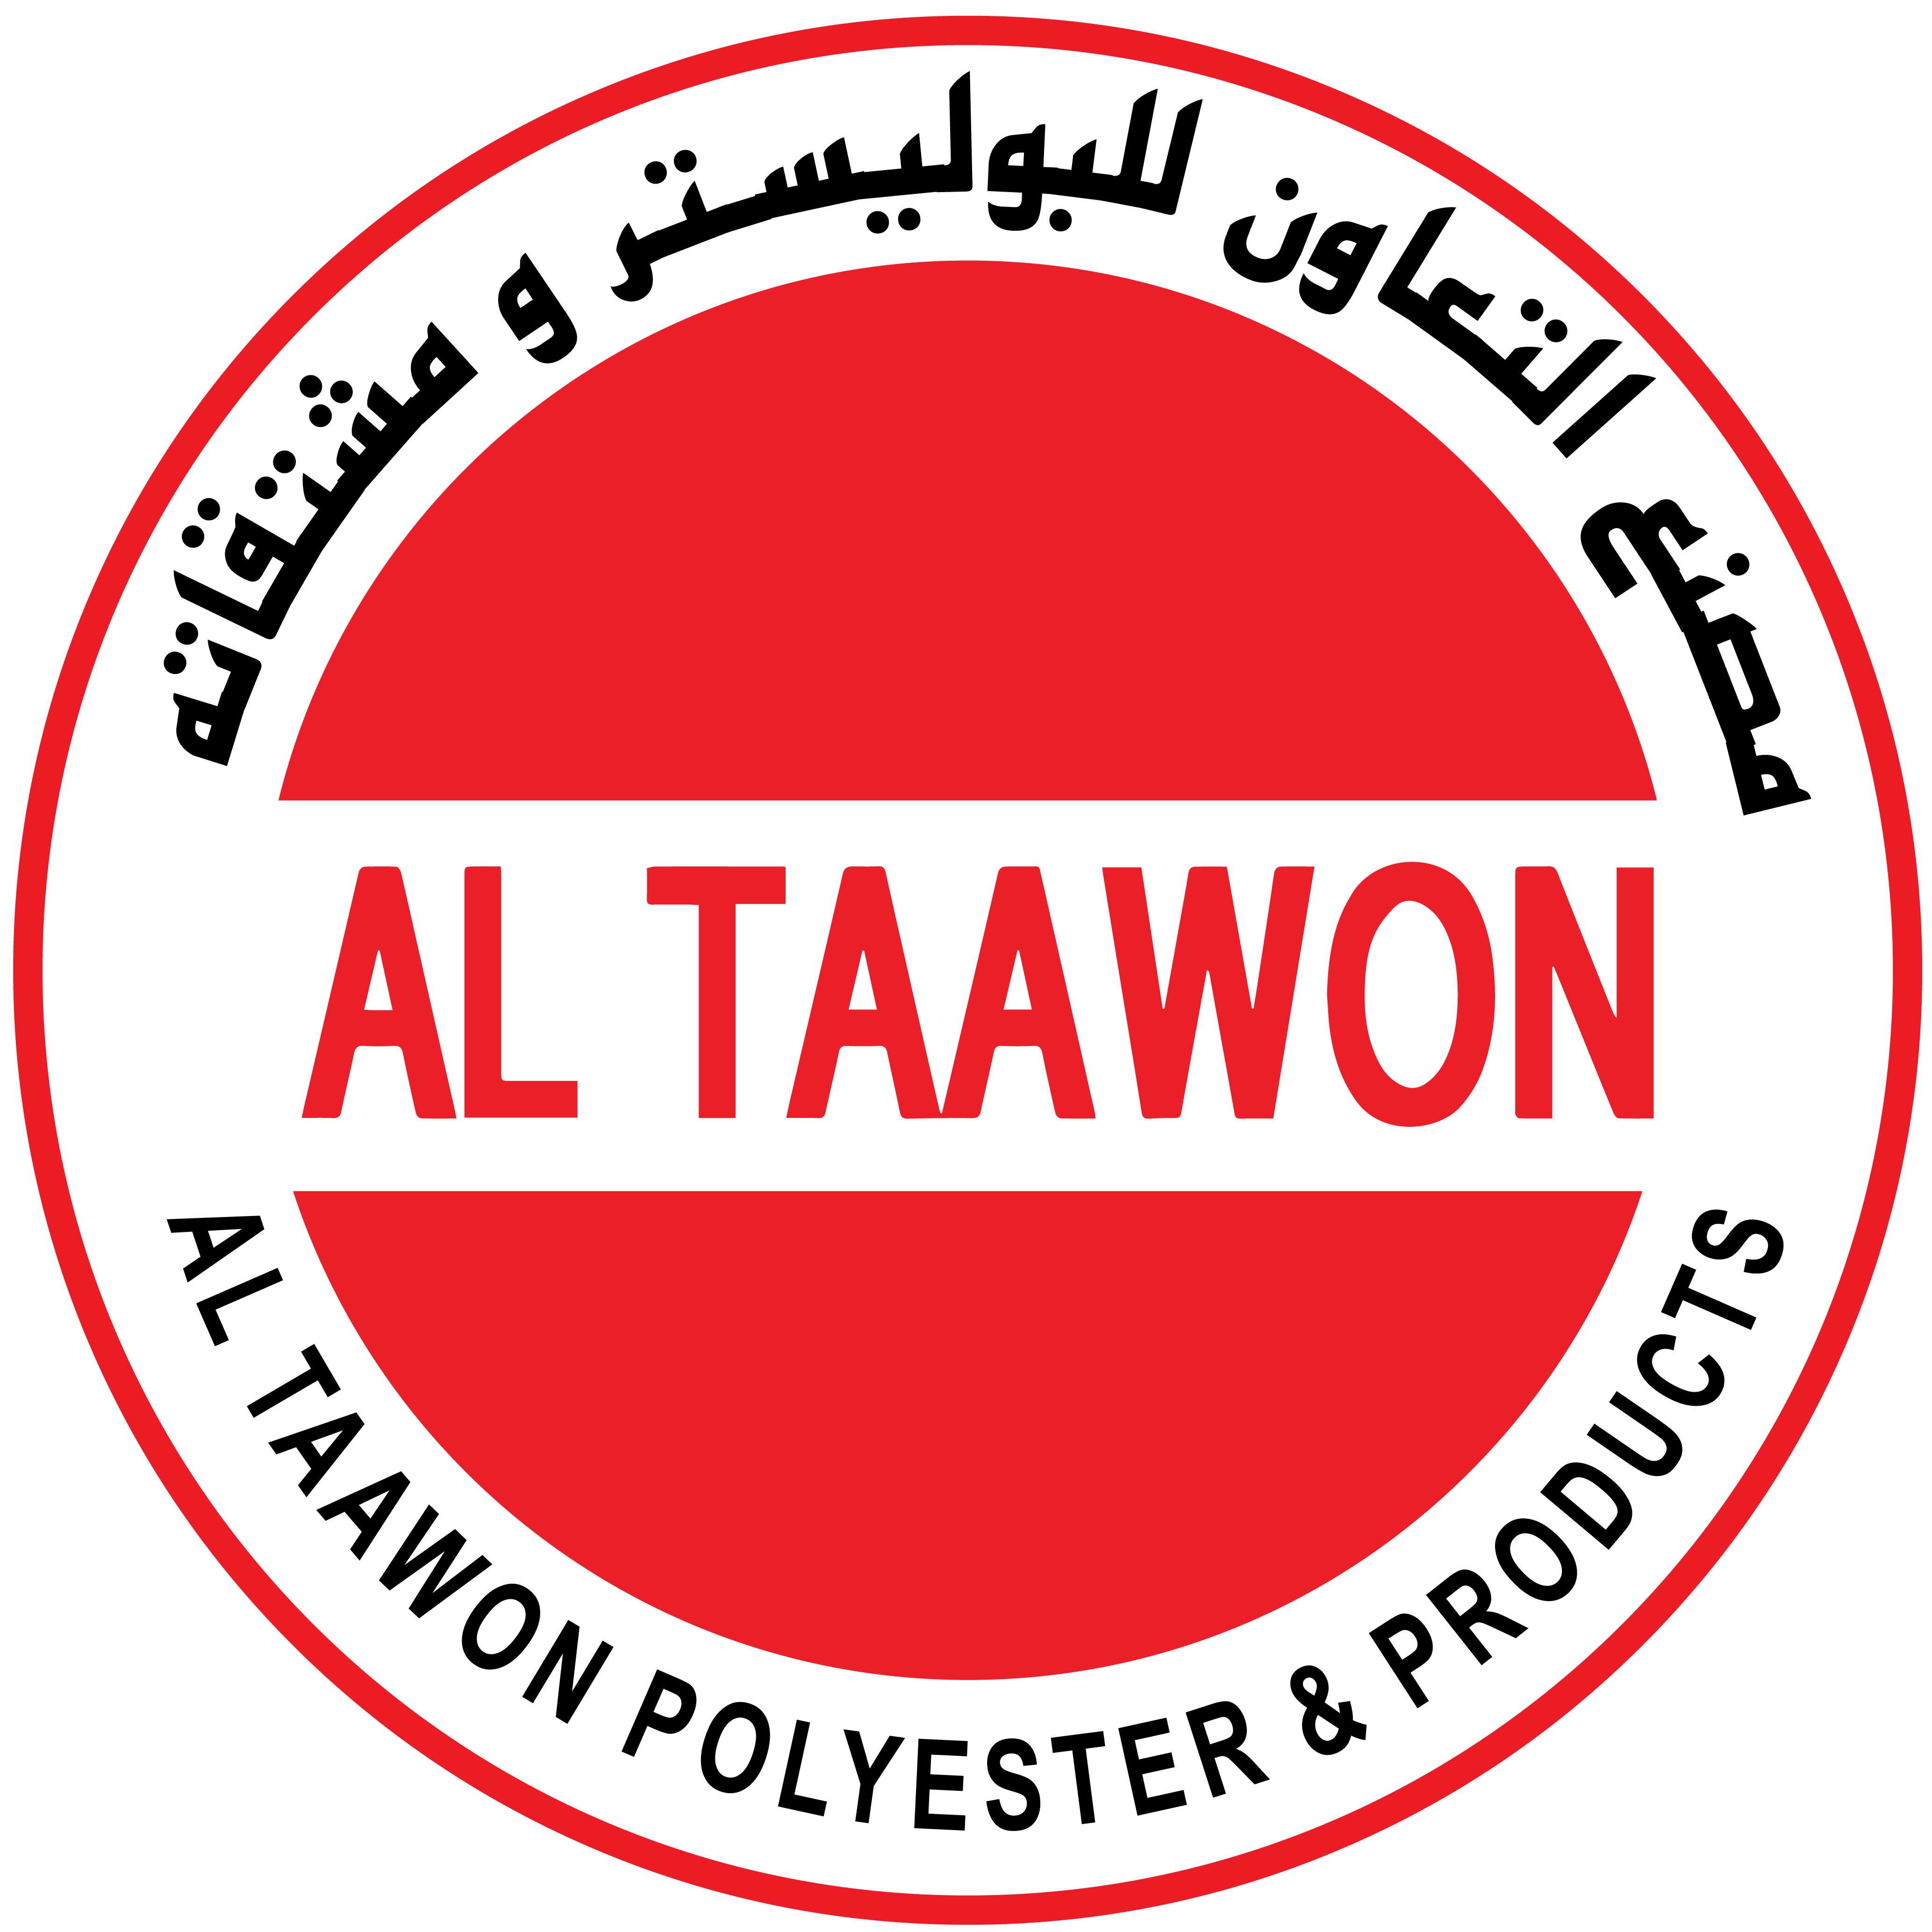 Altaawon Polyester Products